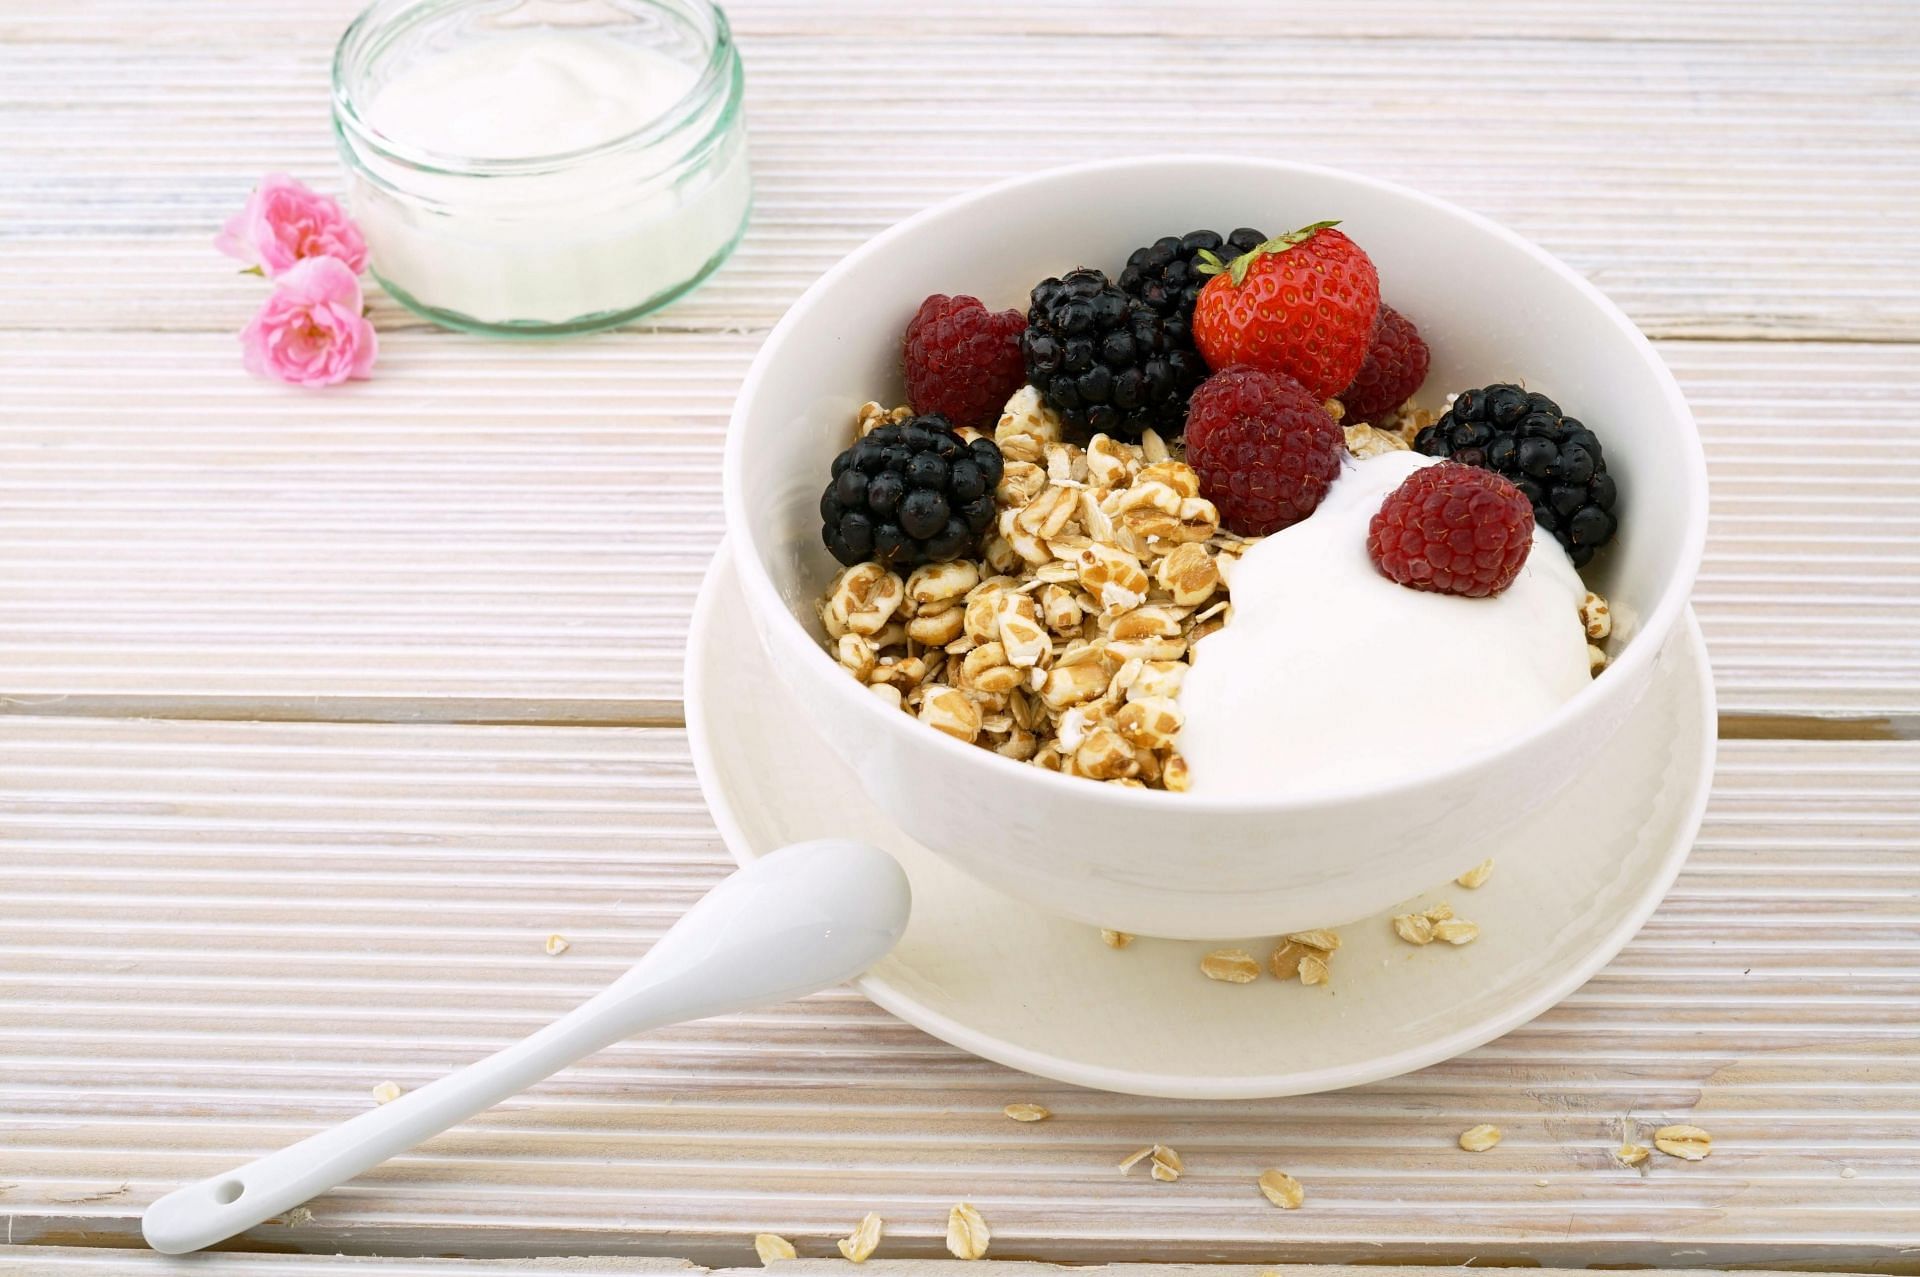 Effective postbiotic foods (image sourced via Pexels / Photo by life of pix)